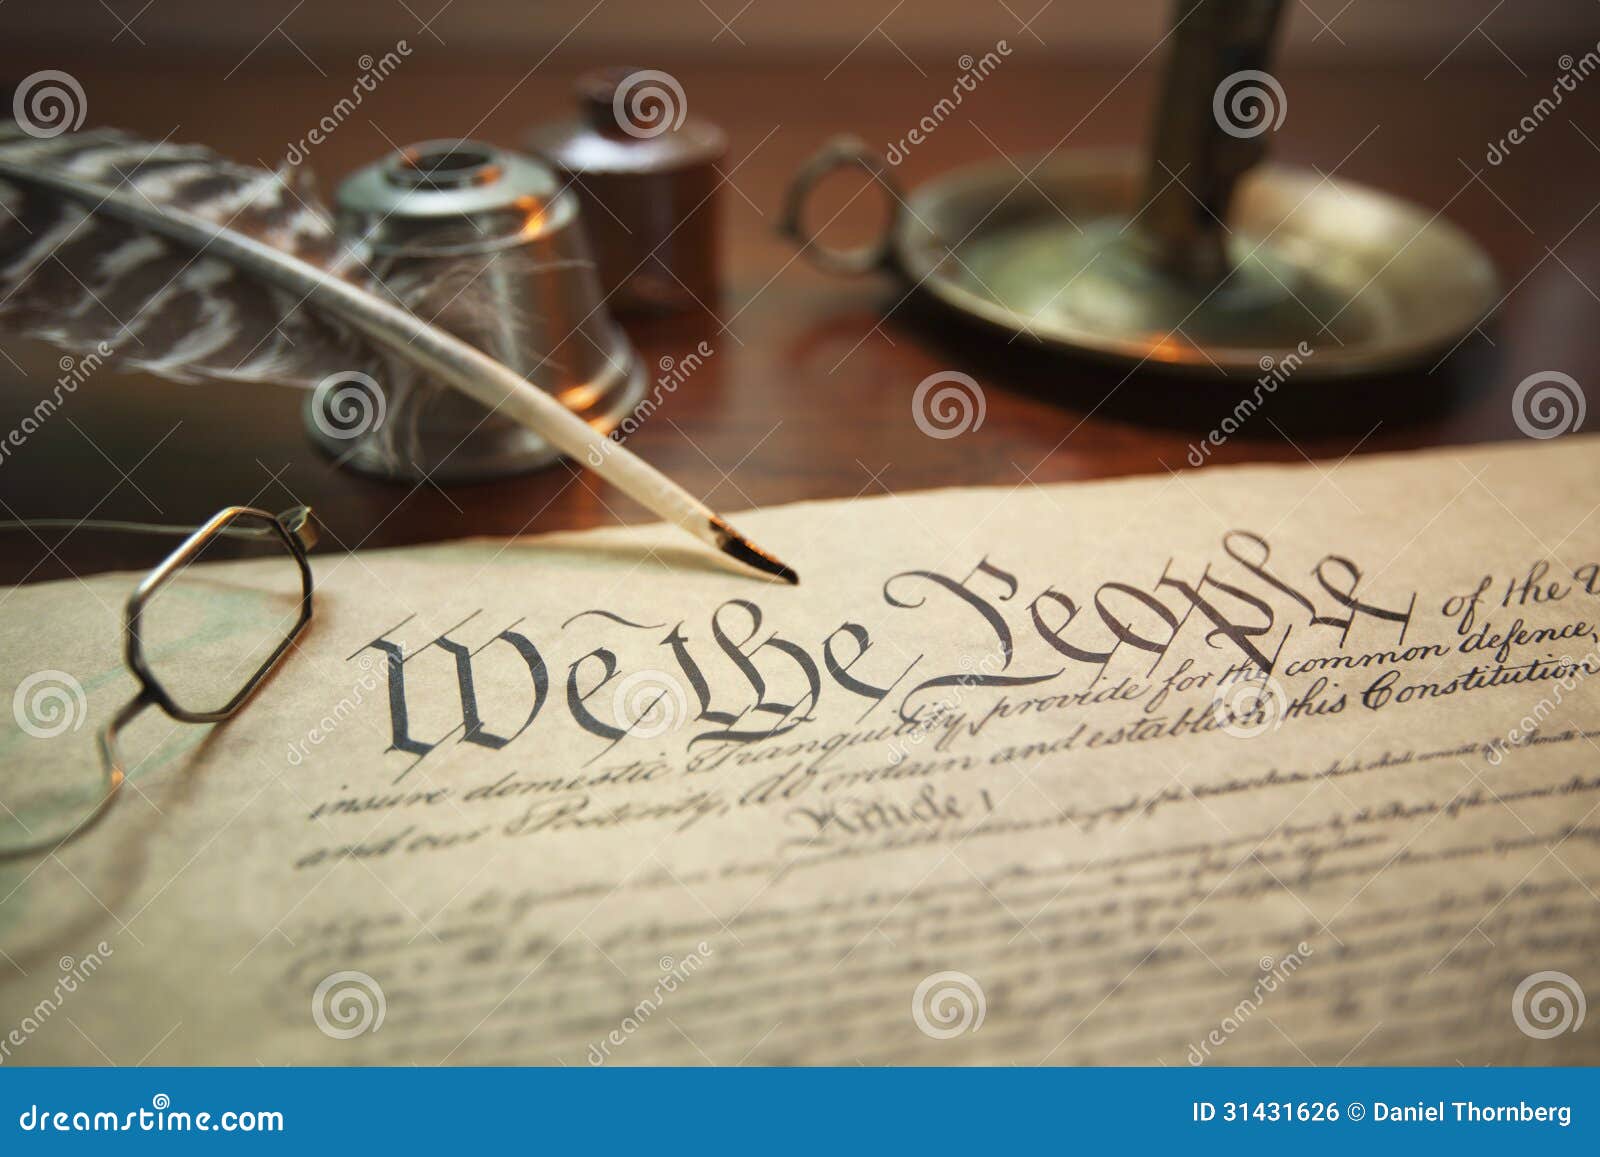 united states constitution with quill, glasses and candle holder